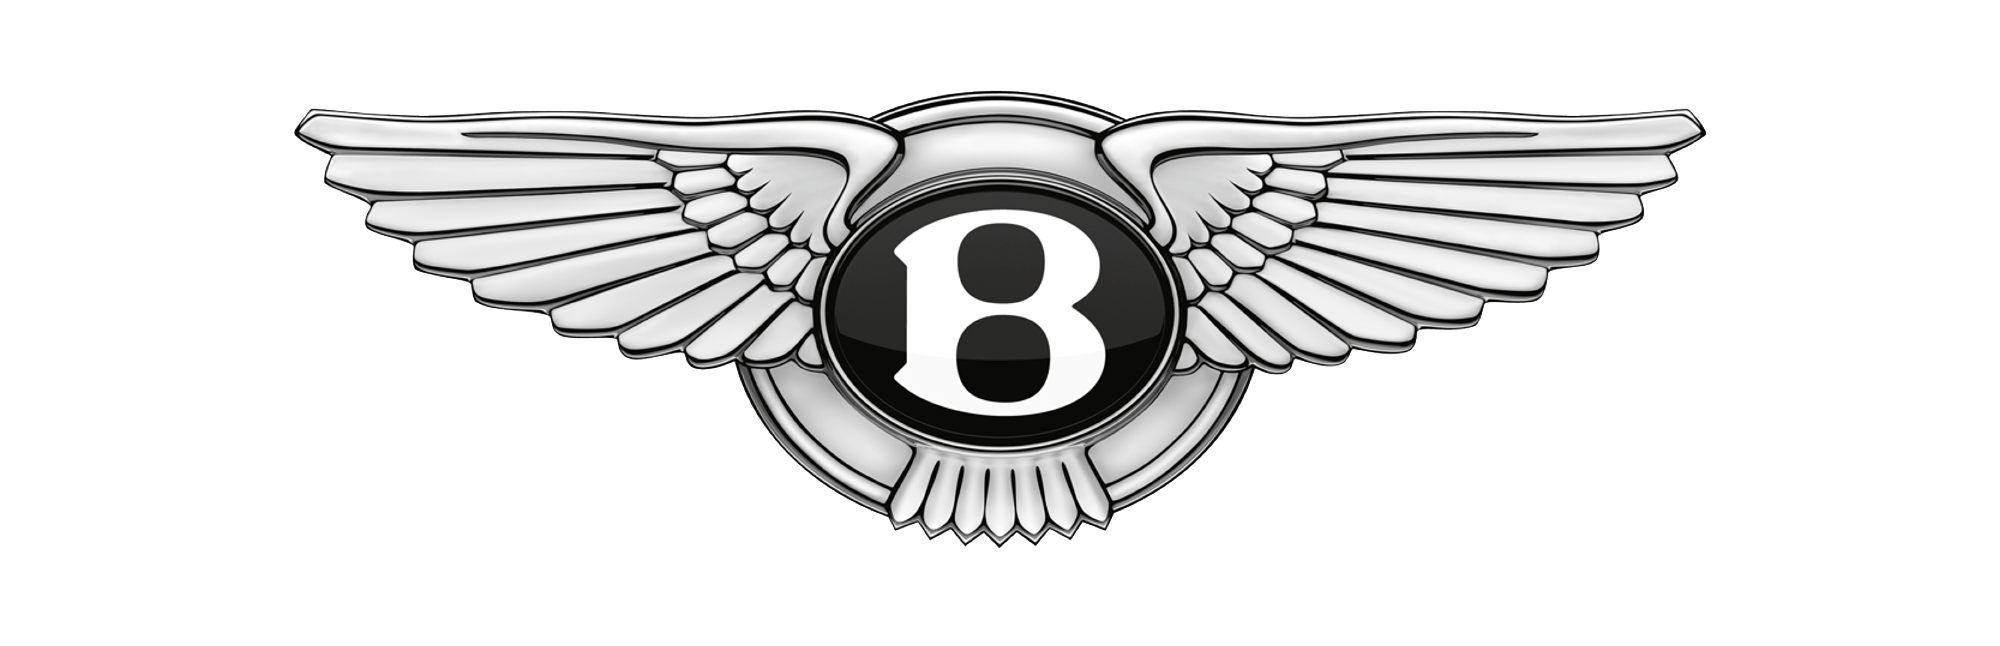 Black and White B Logo - Bentley Logo Meaning and History. Symbol Bentley | World Cars Brands